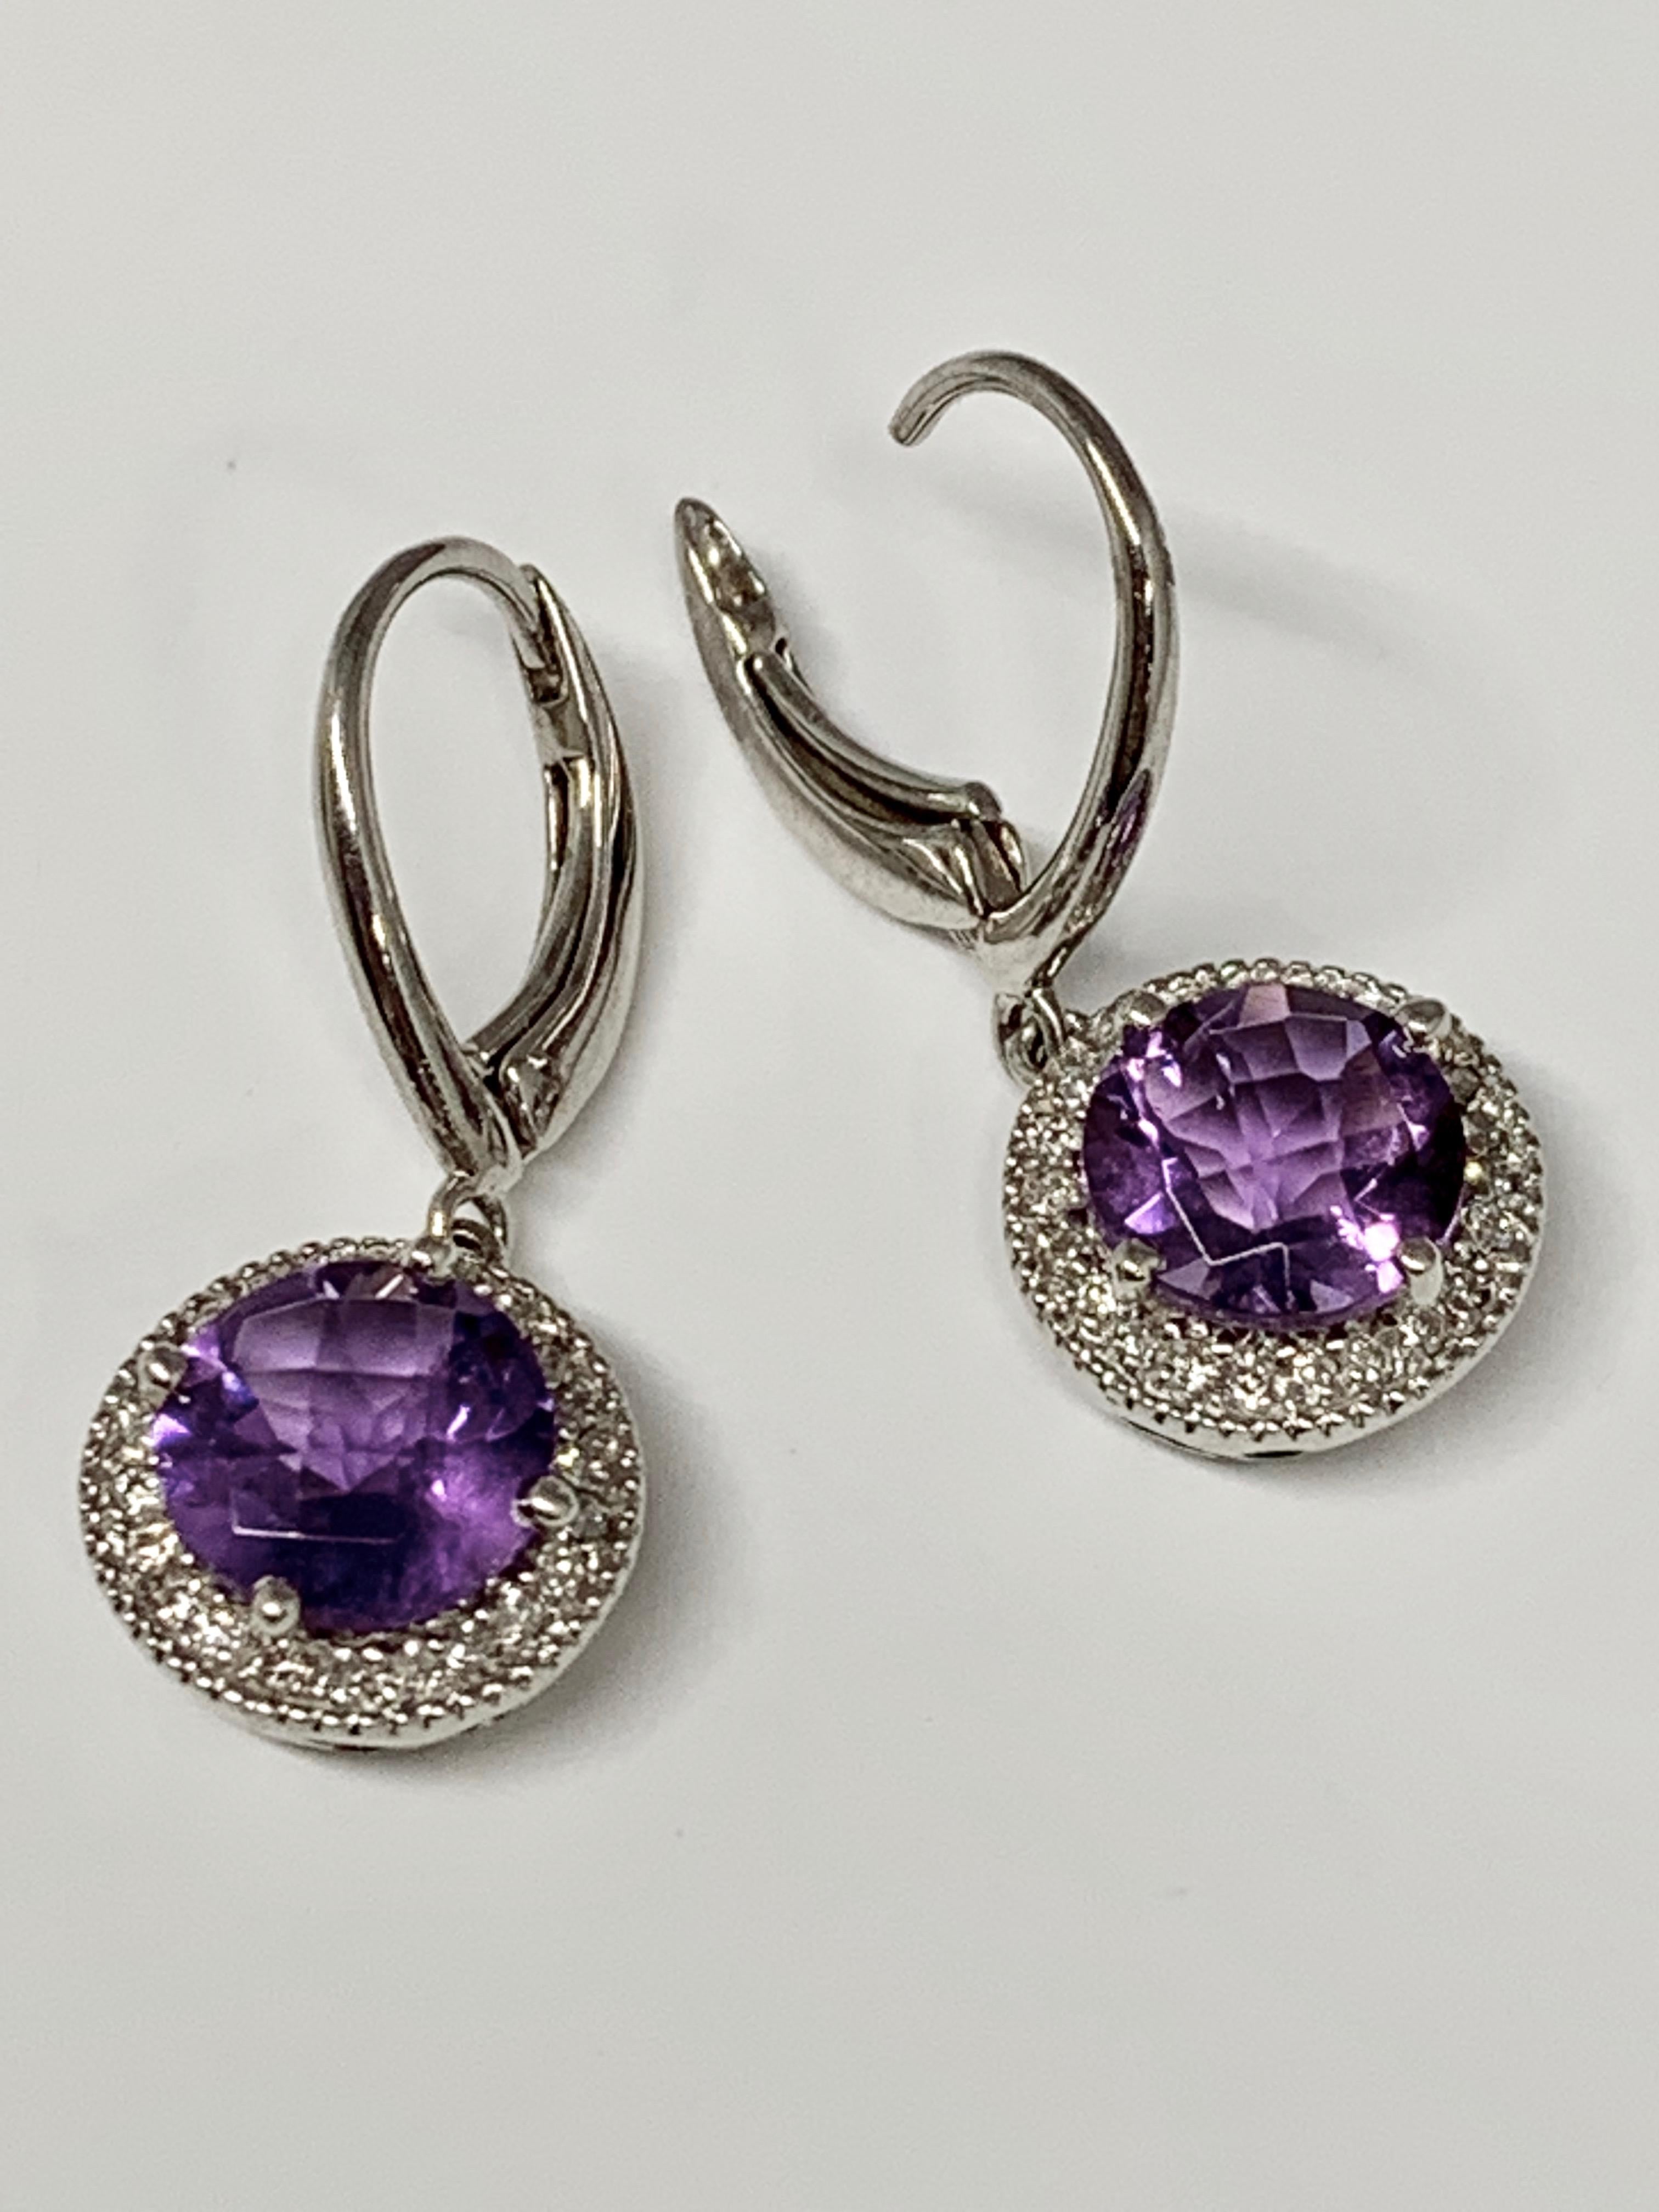 Contemporary 14 Karat White Gold 2.24 Carat Total Weight Amethyst and Diamond Drop Earrings